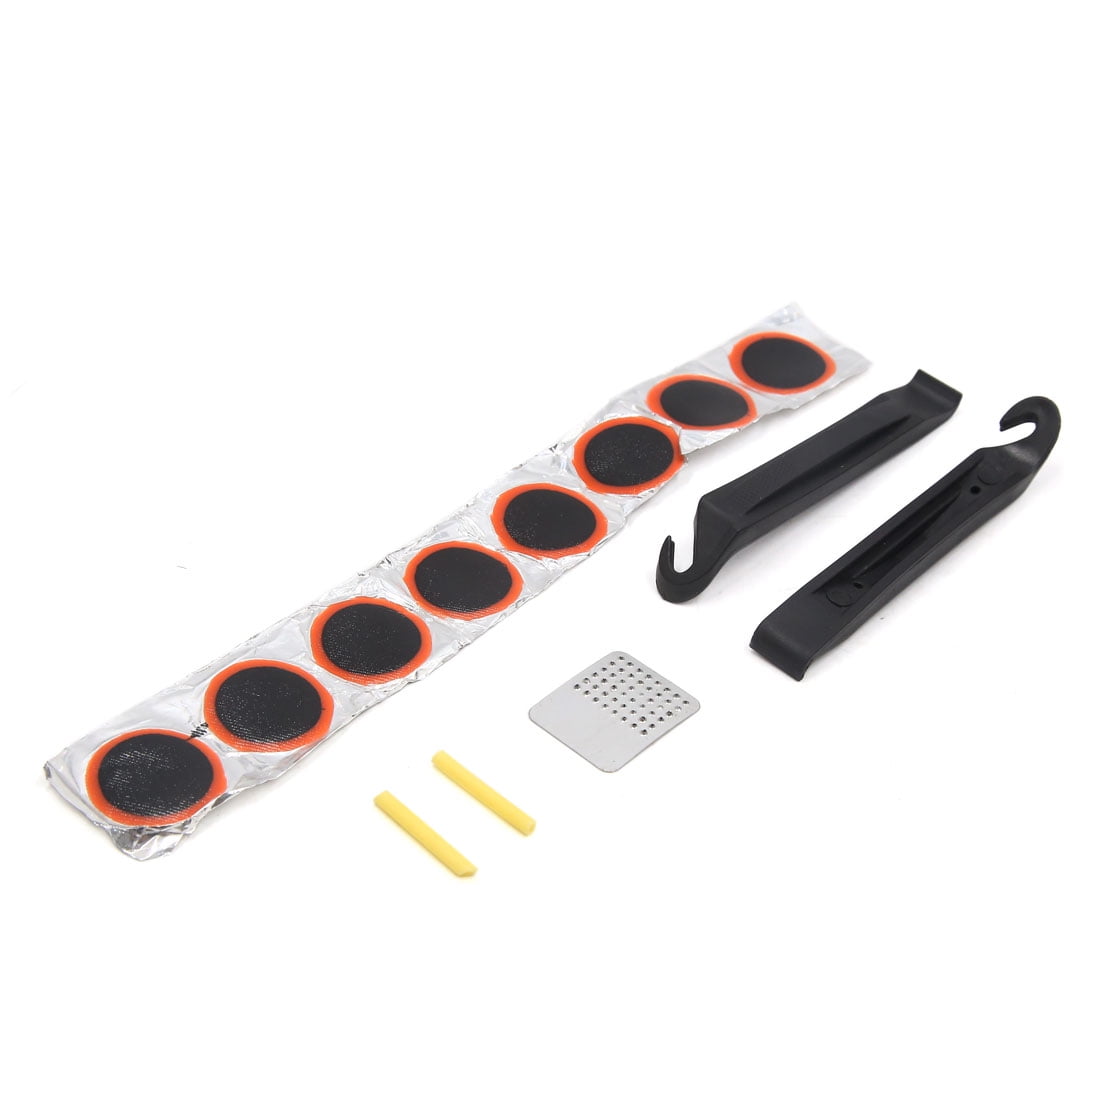 4.3x3.3cm Bike Tire Patch Square Patches Tyre Kit Metal Rasp File Tool 